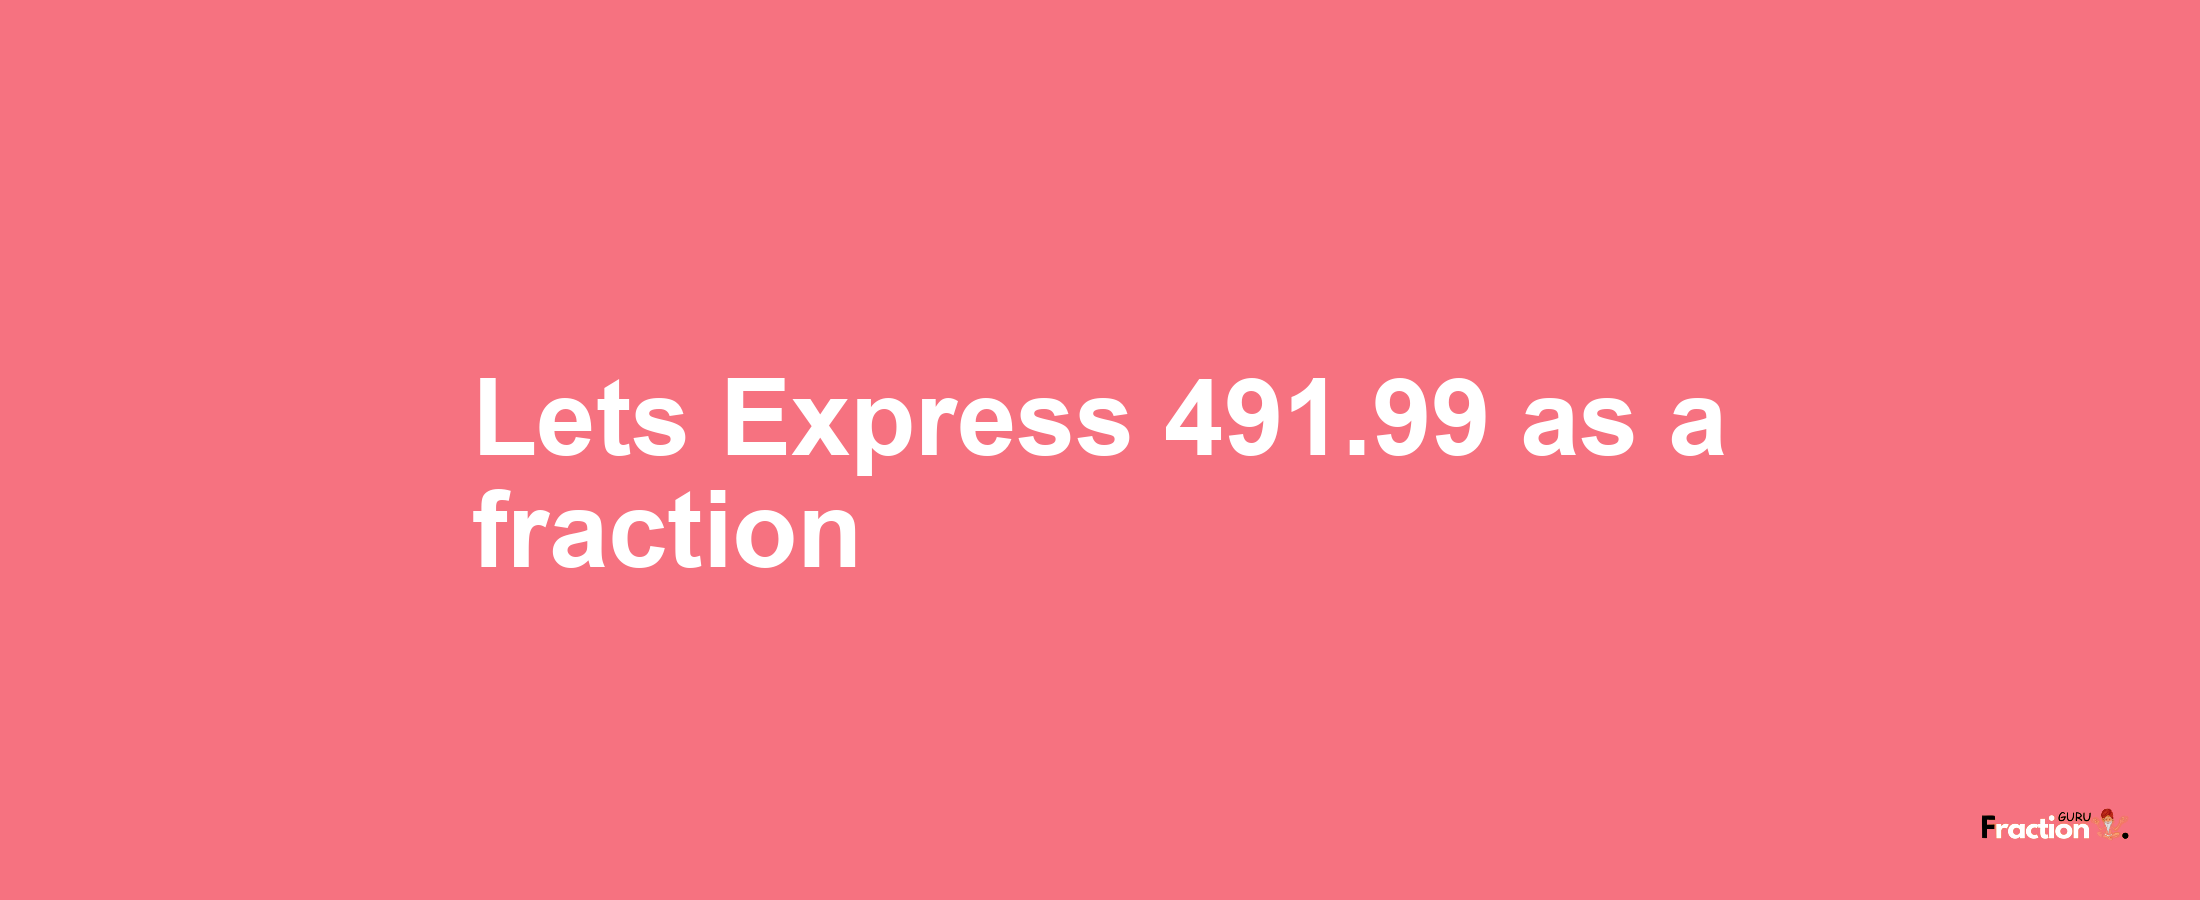 Lets Express 491.99 as afraction